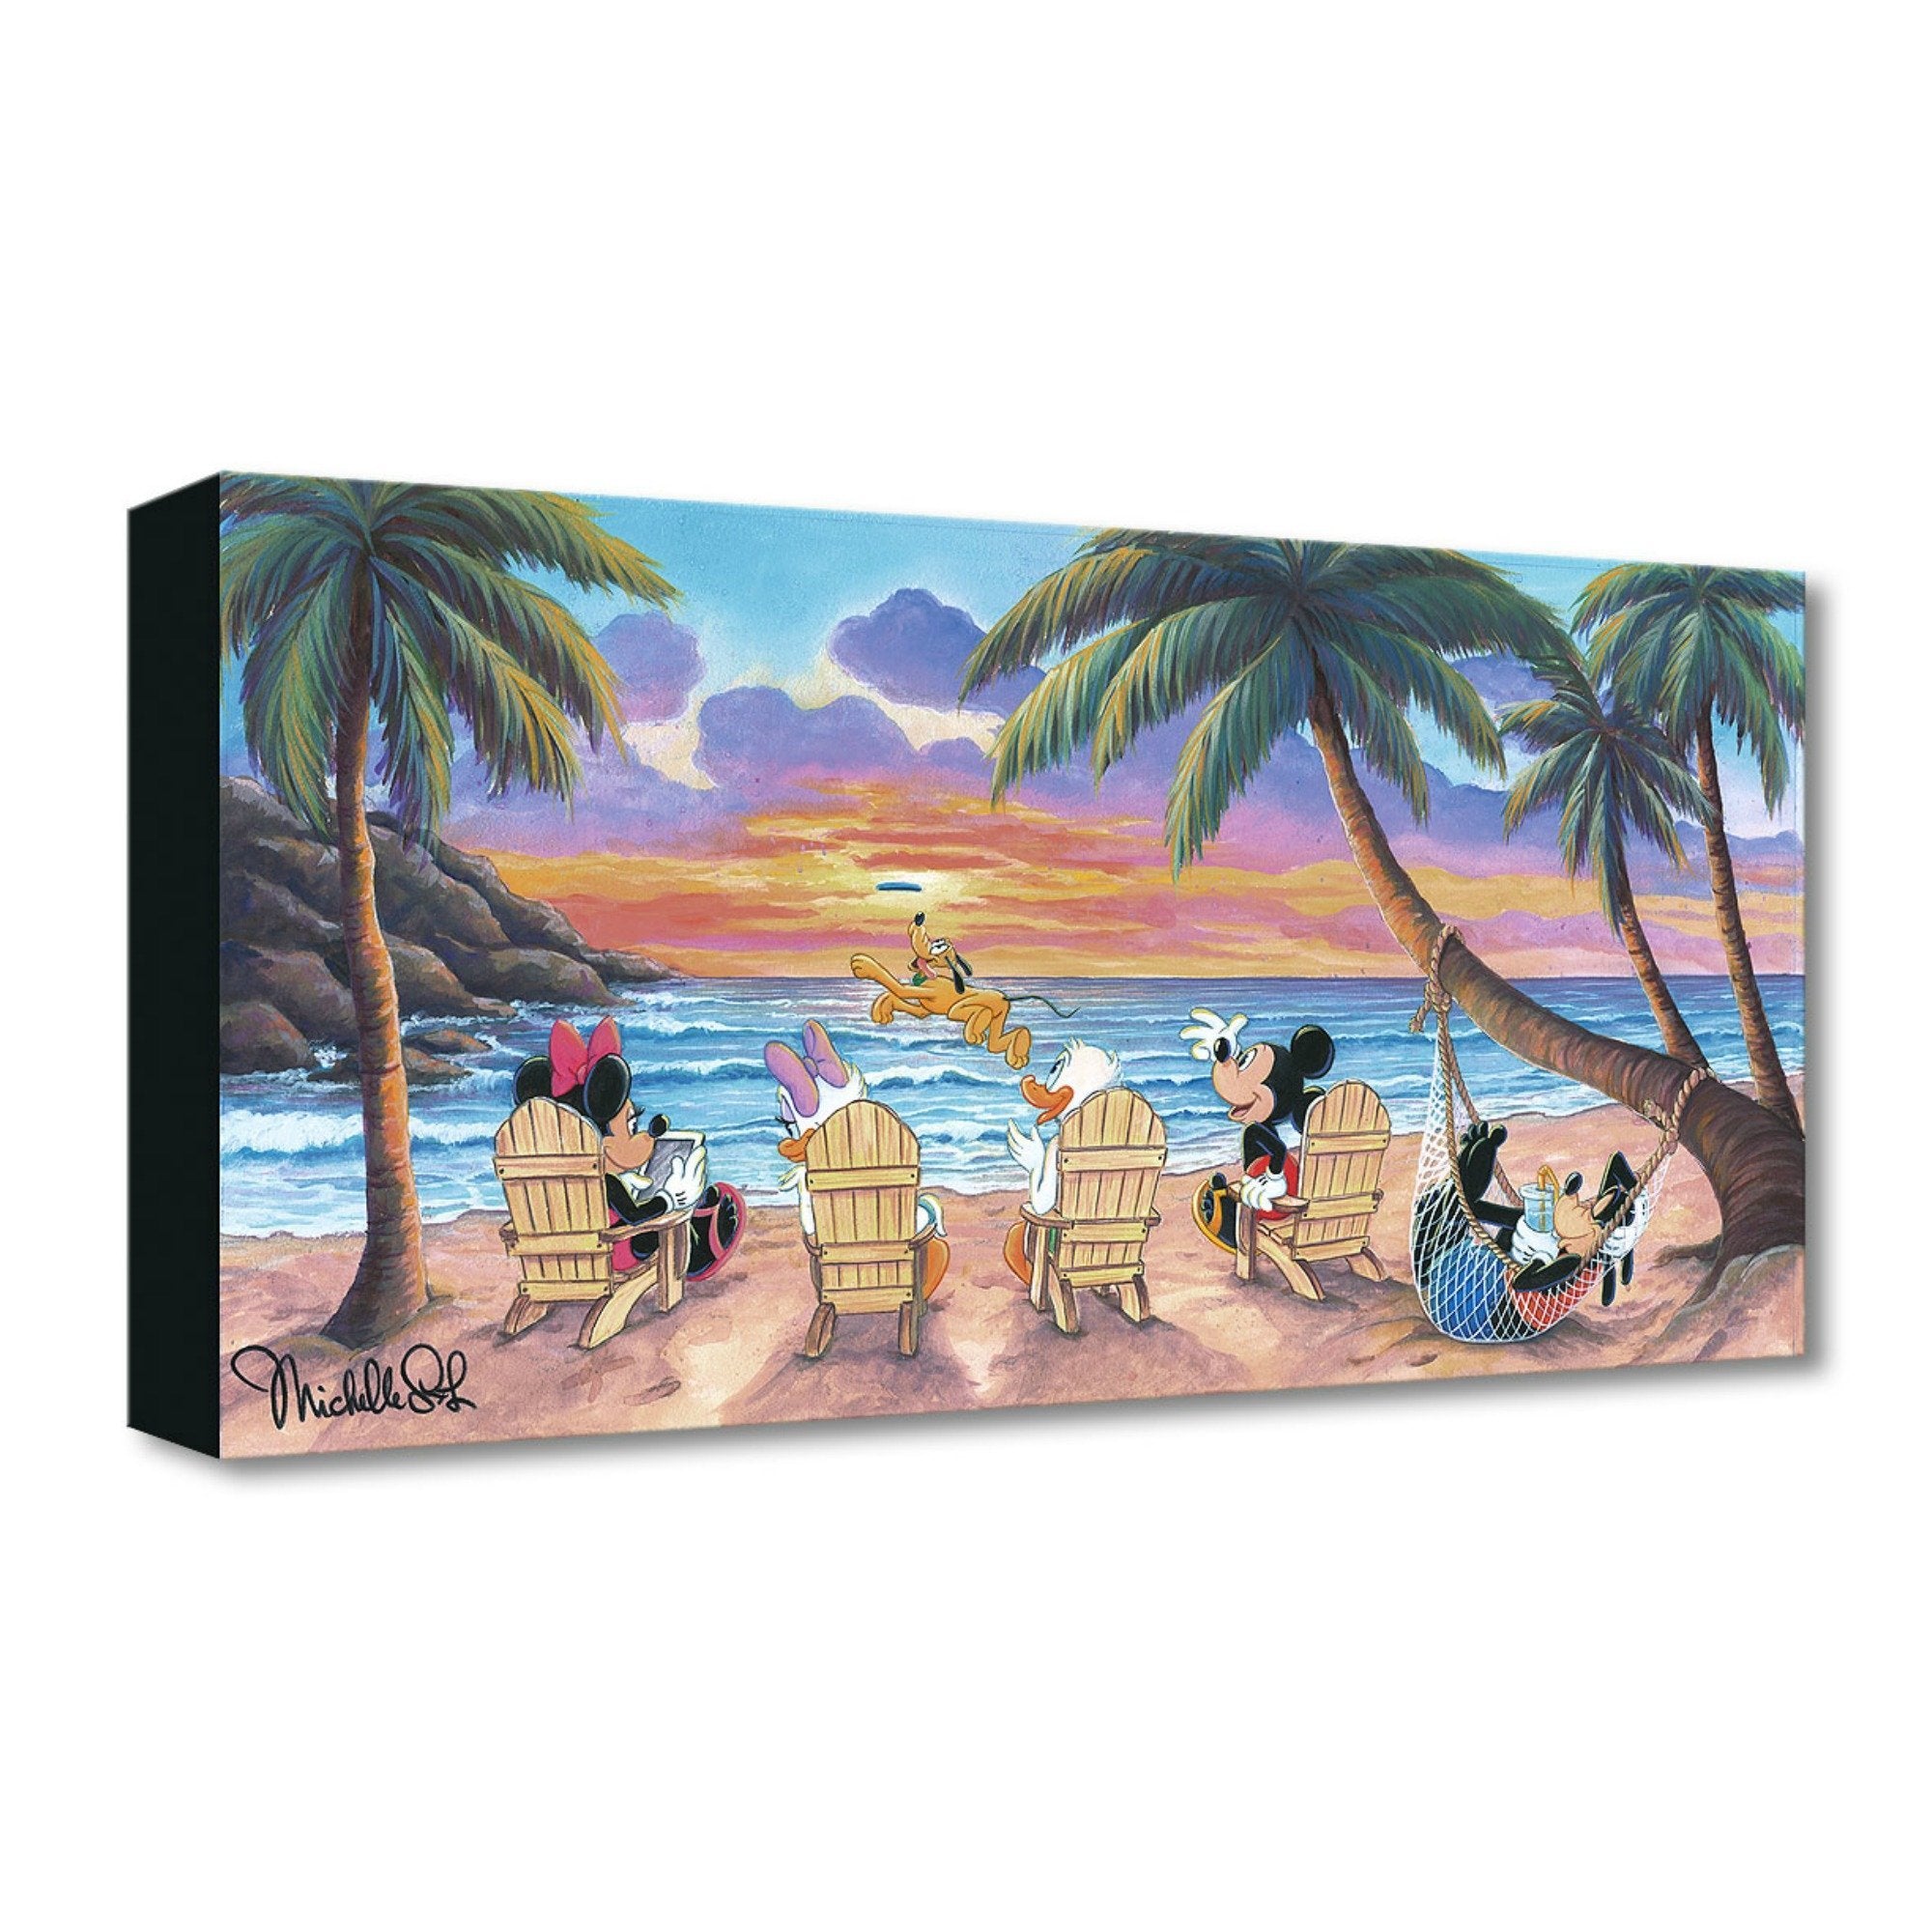 A Beautiful Day at the Beach by Michelle St. Laurent.  Mickey, Minnie, Daisy, and Donald spend the day sitting around the beach and watch Pluto play catch the frisbee.